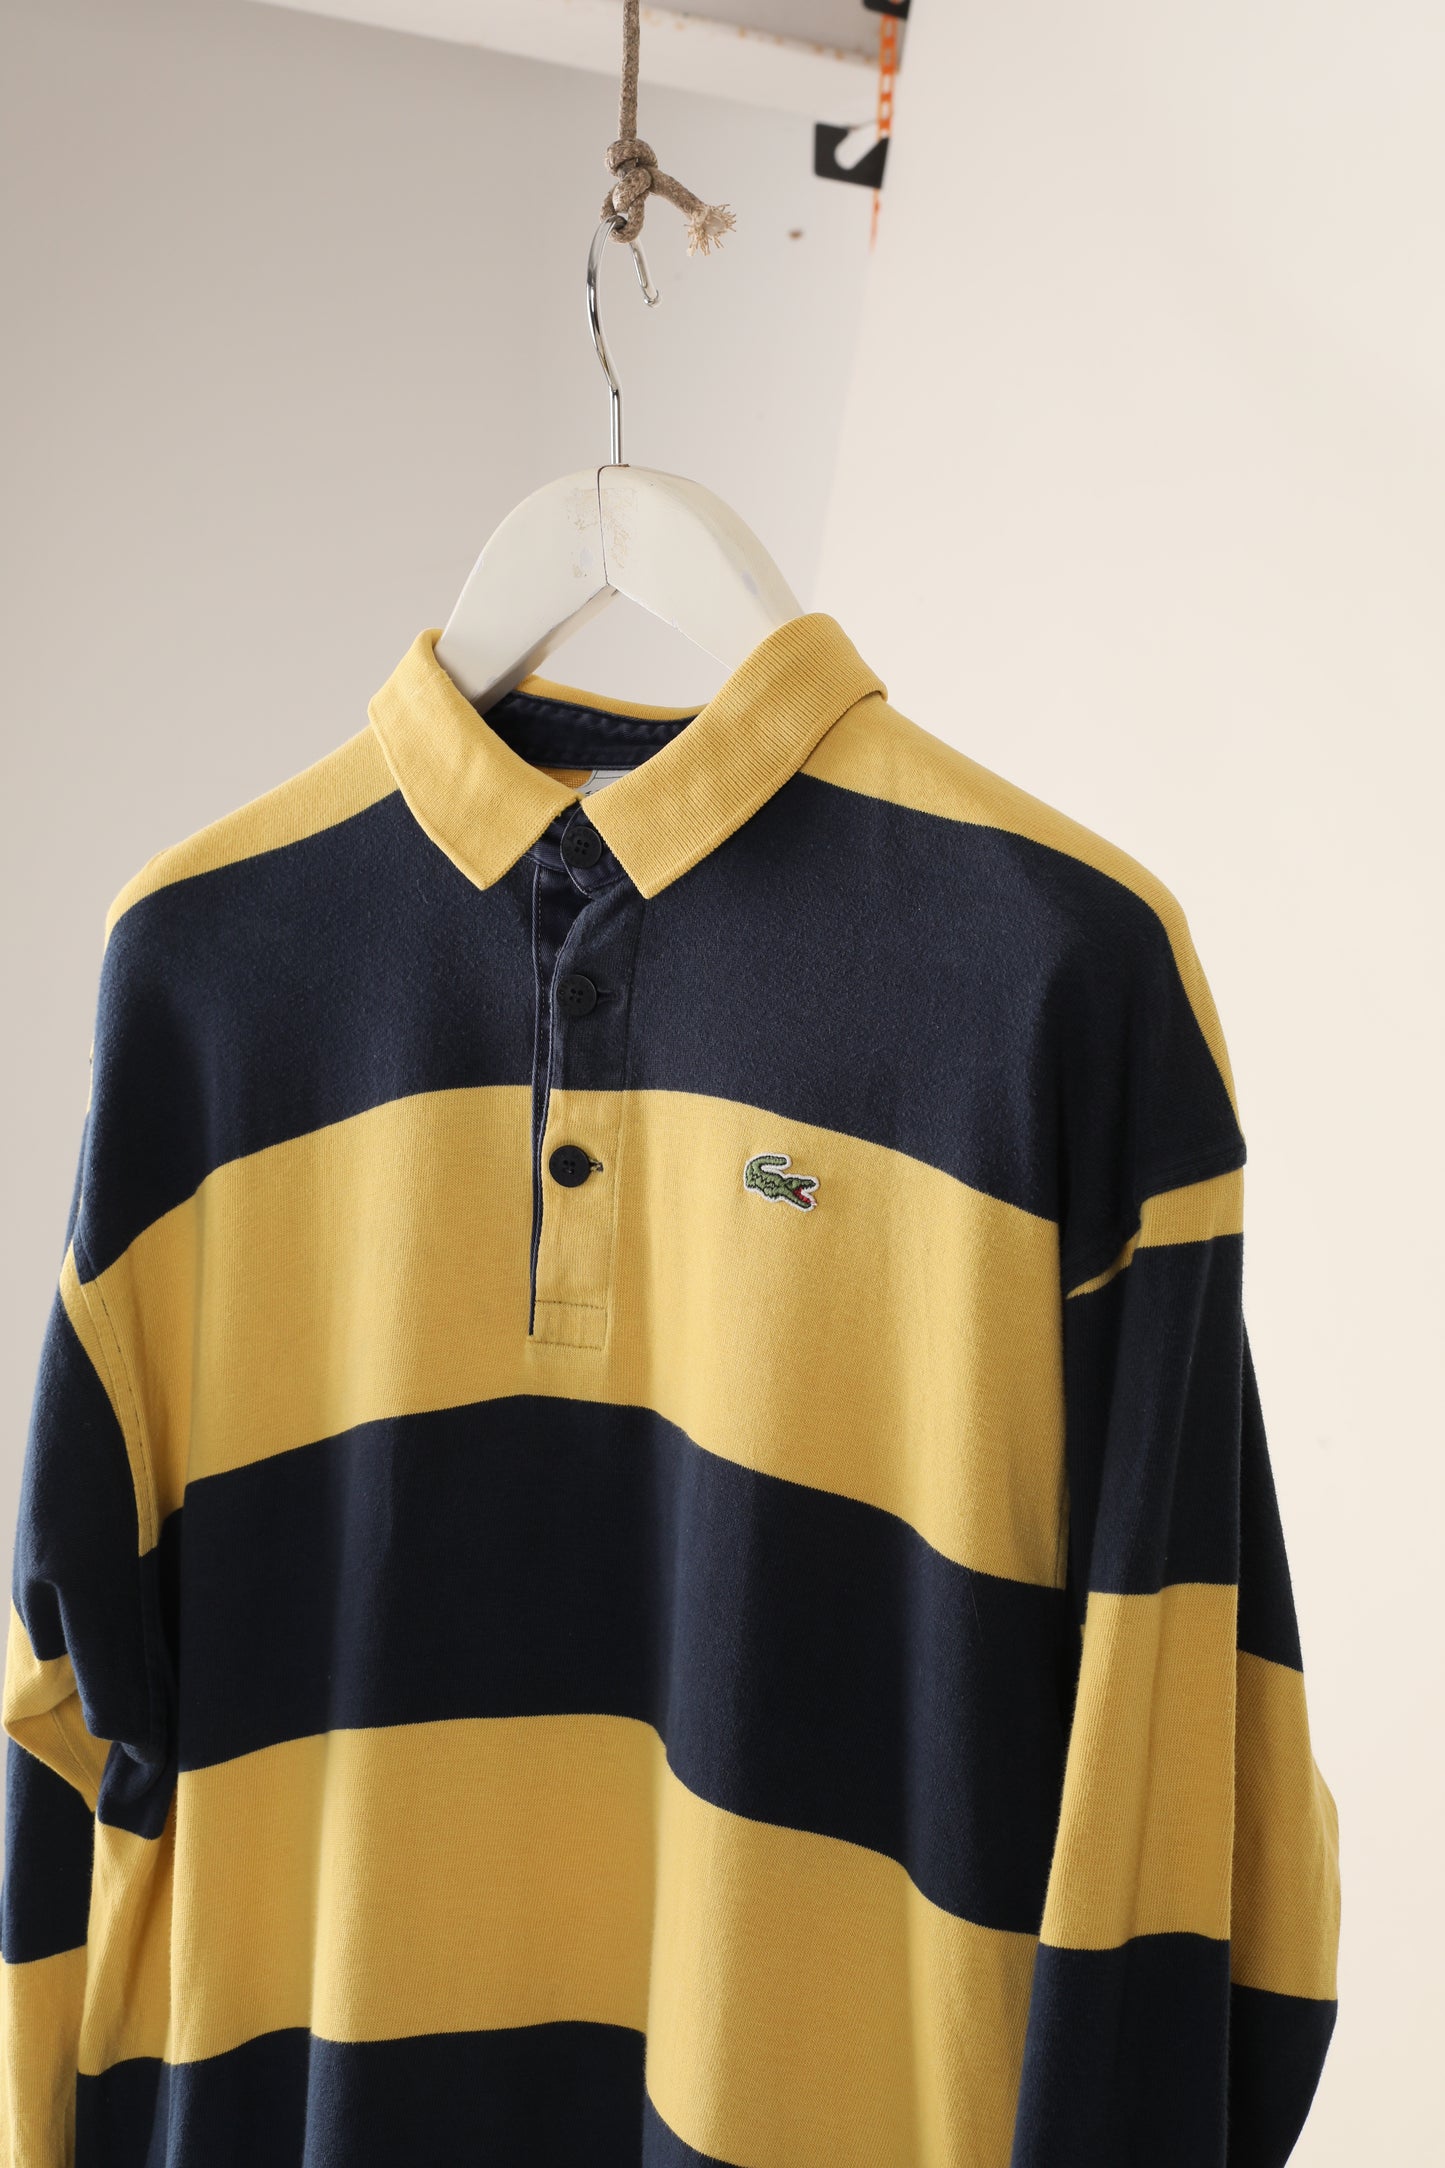 90s Lacoste stripe Rugby shirt (XL)